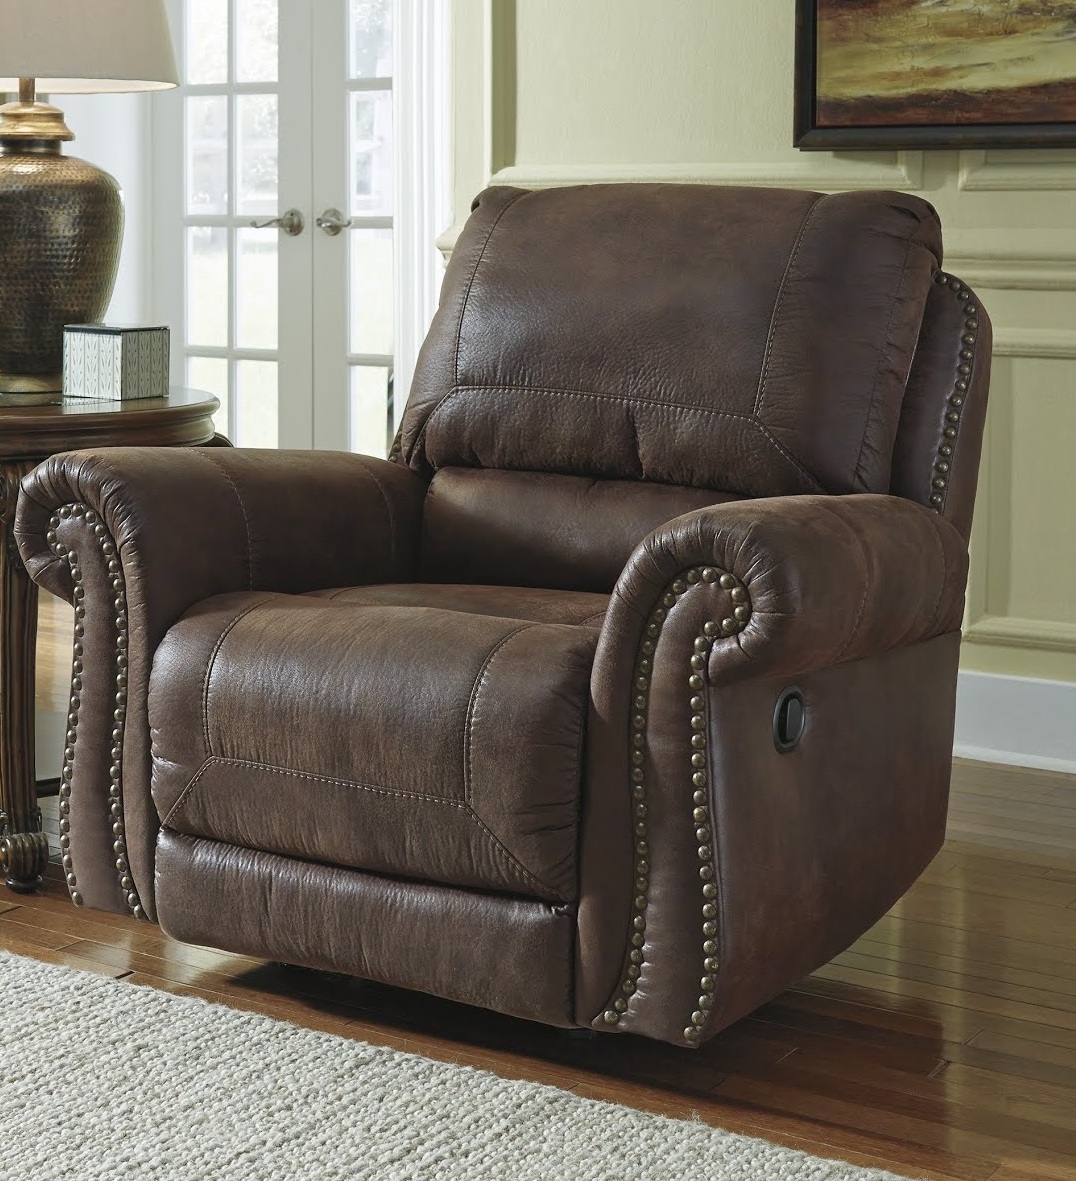 Stafford Leather Living Room Chair